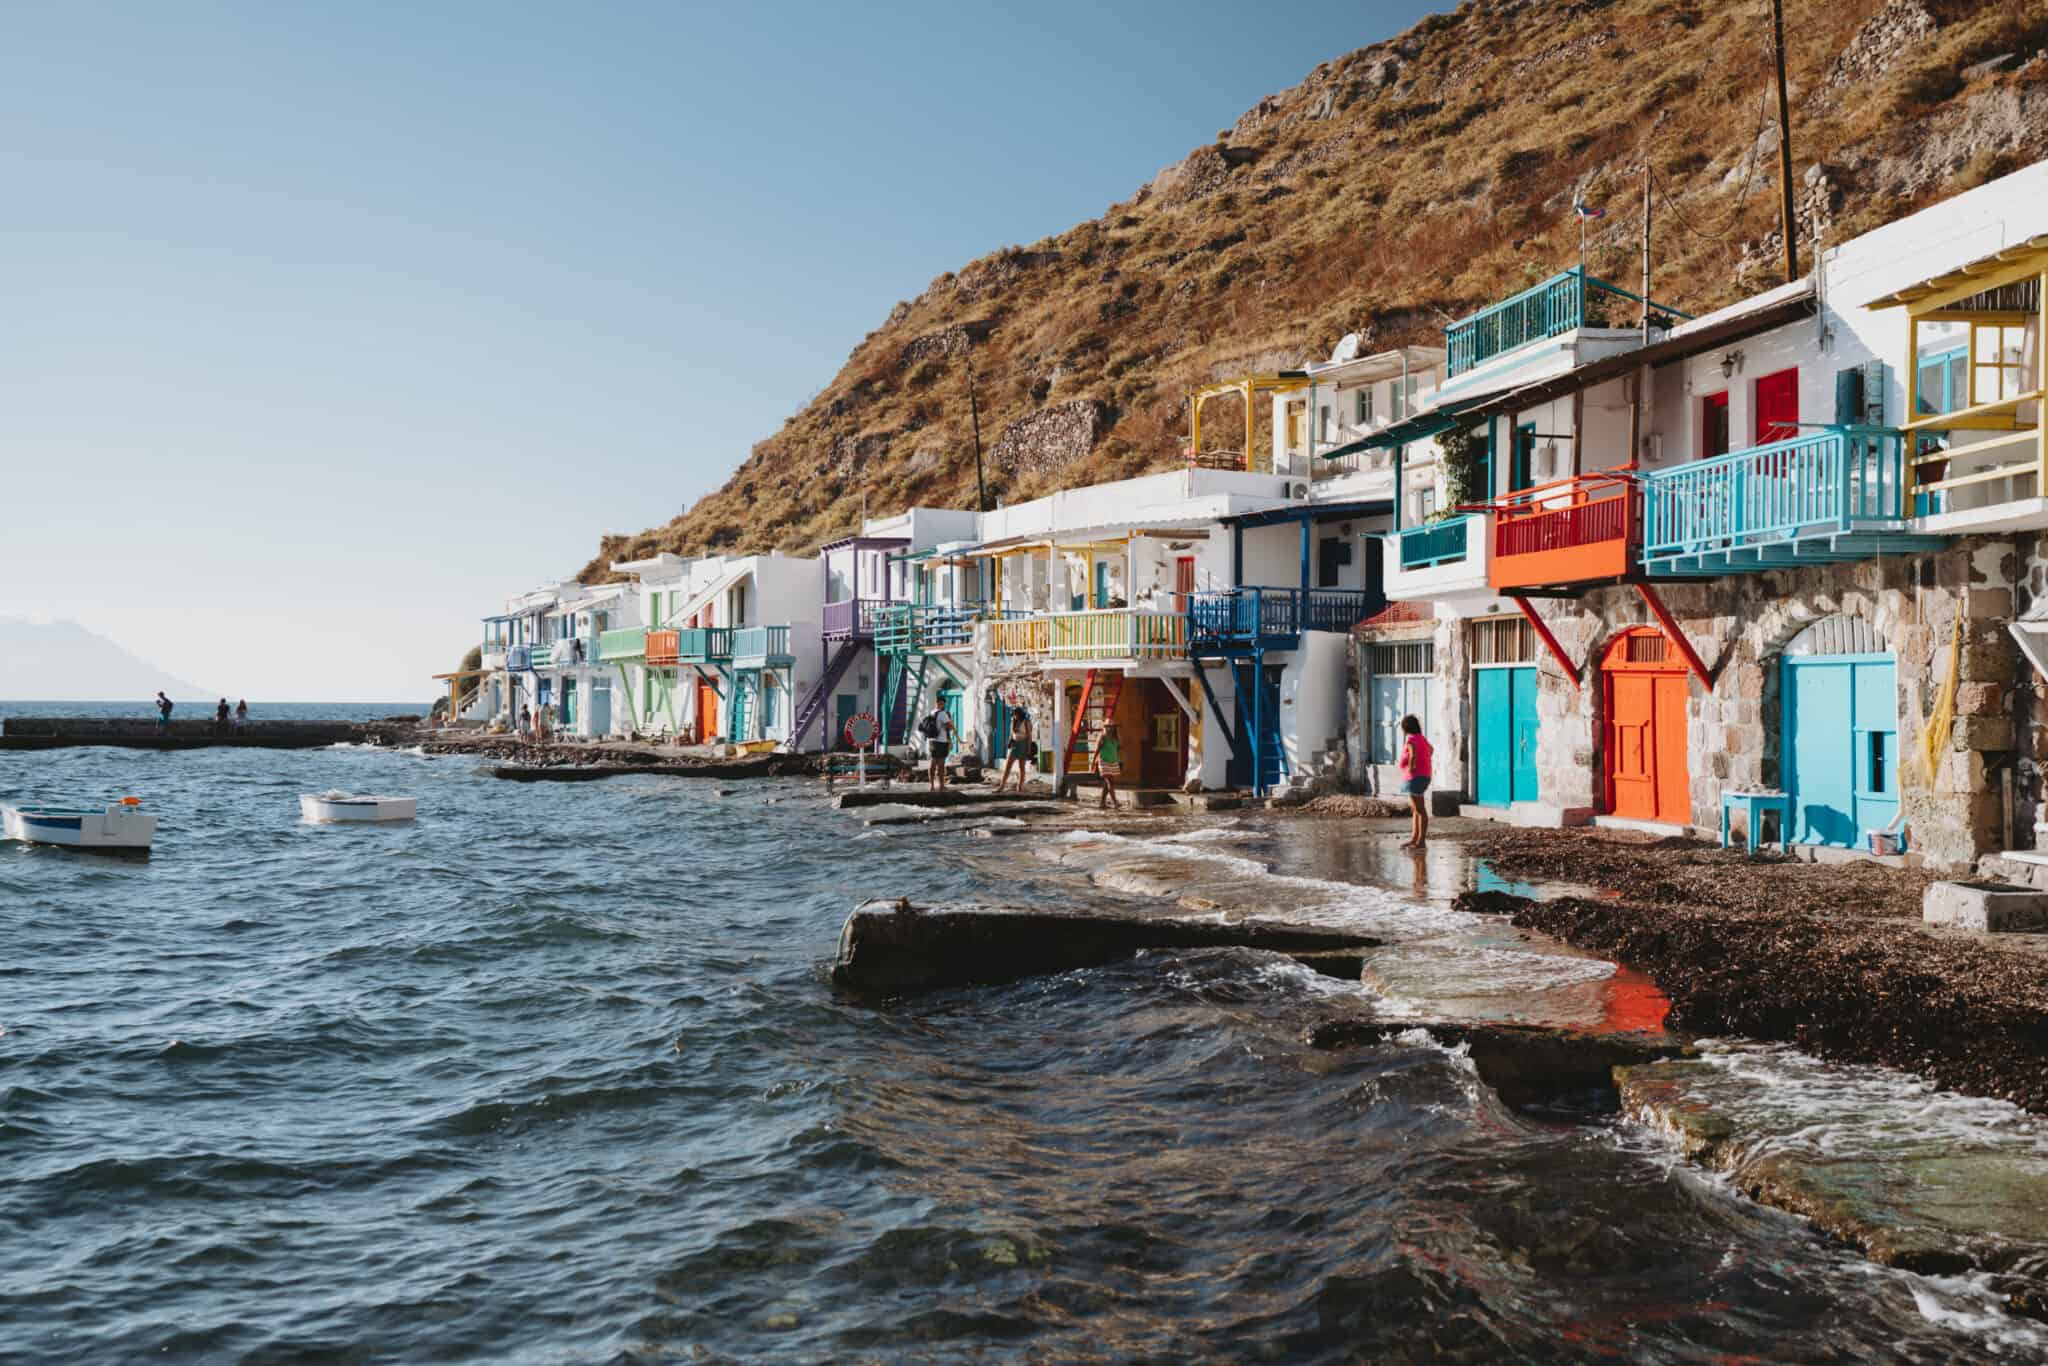 Colorful houses on a cliff near the water in Milos Greece.